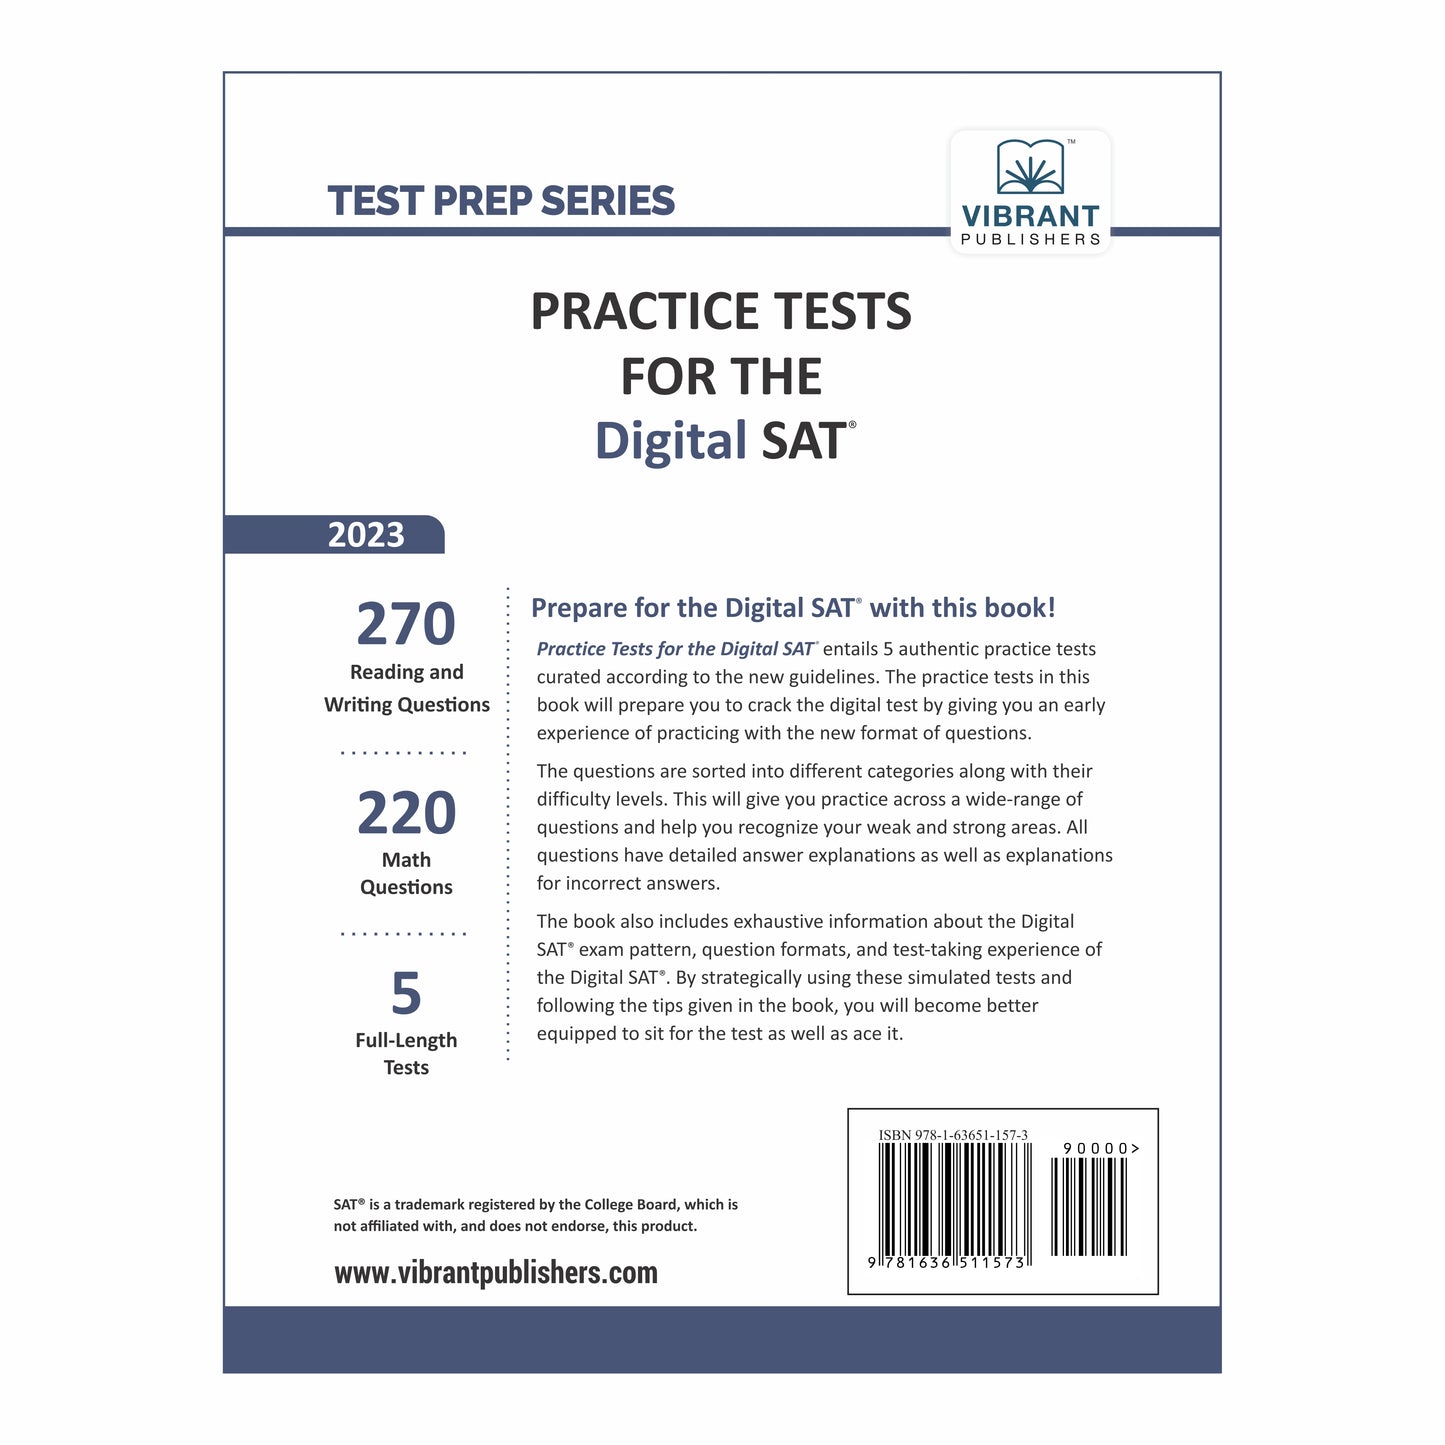 Practice Tests for the Digital SAT (2023 Edition)